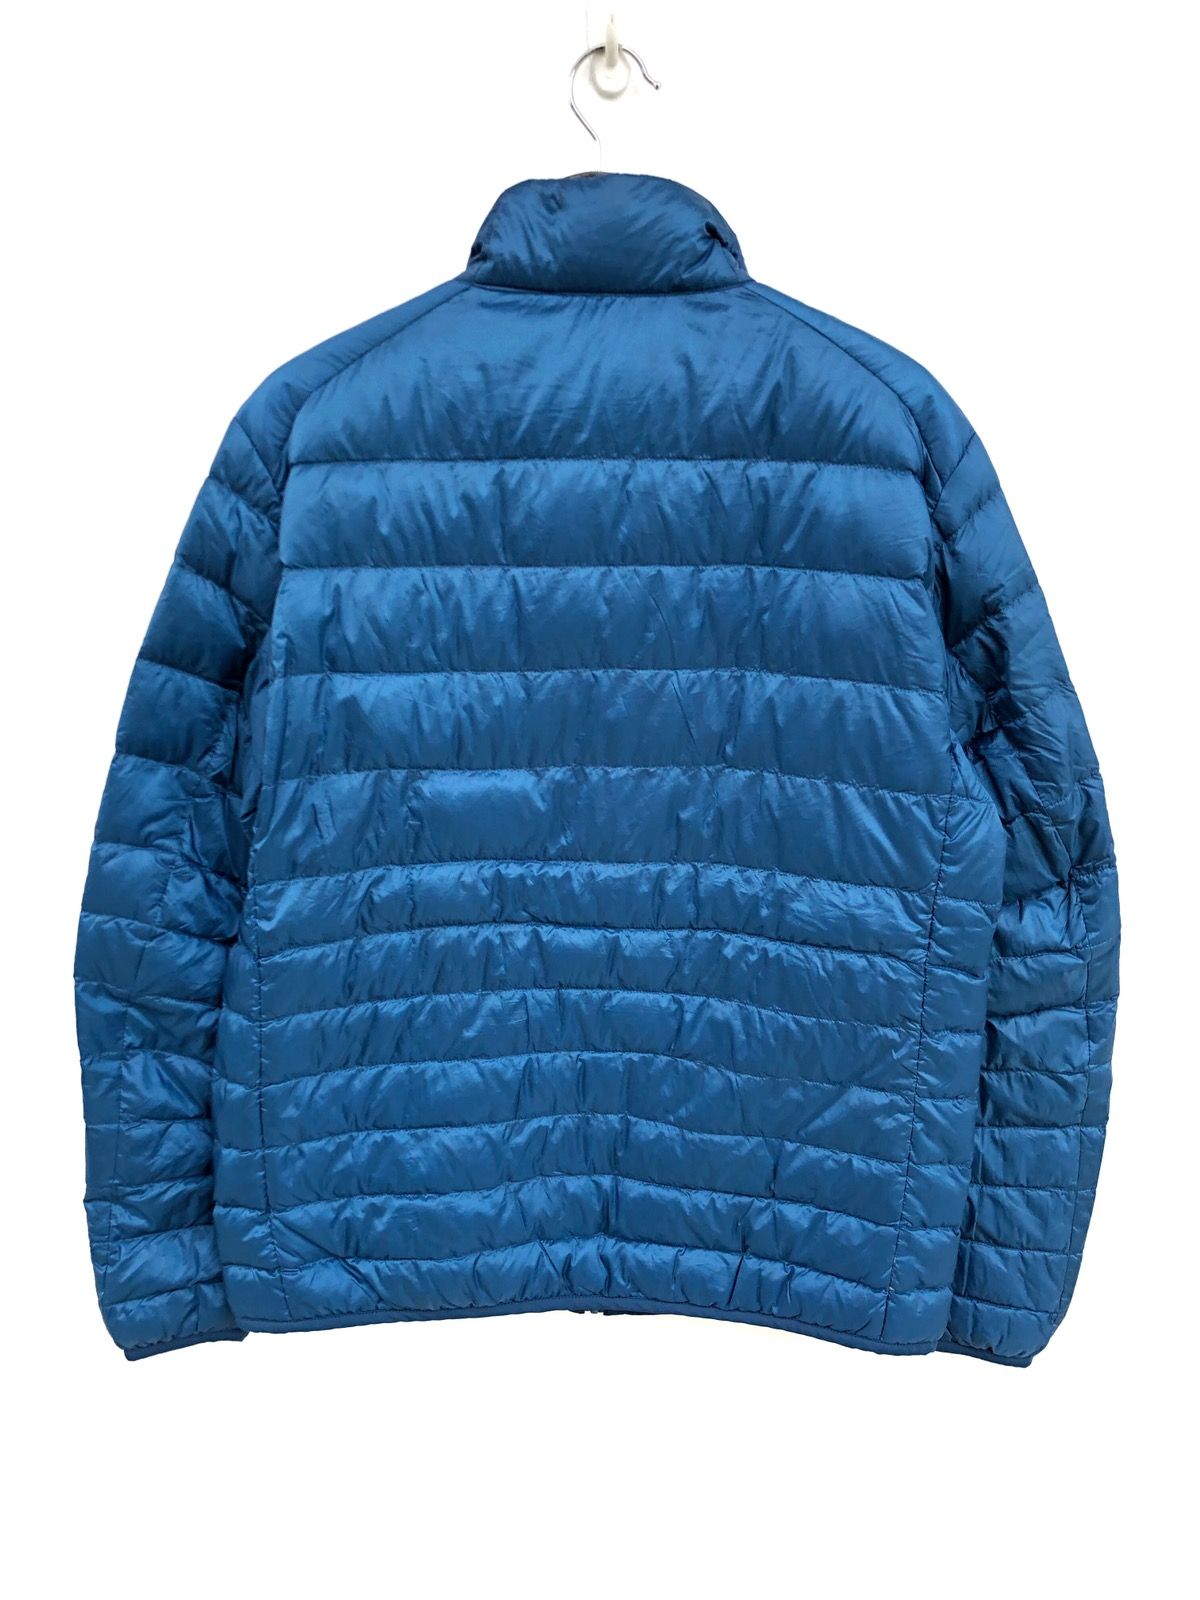 Uniqlo Puffer Quilted Jacket Size US S / EU 44-46 / 1 - 2 Preview